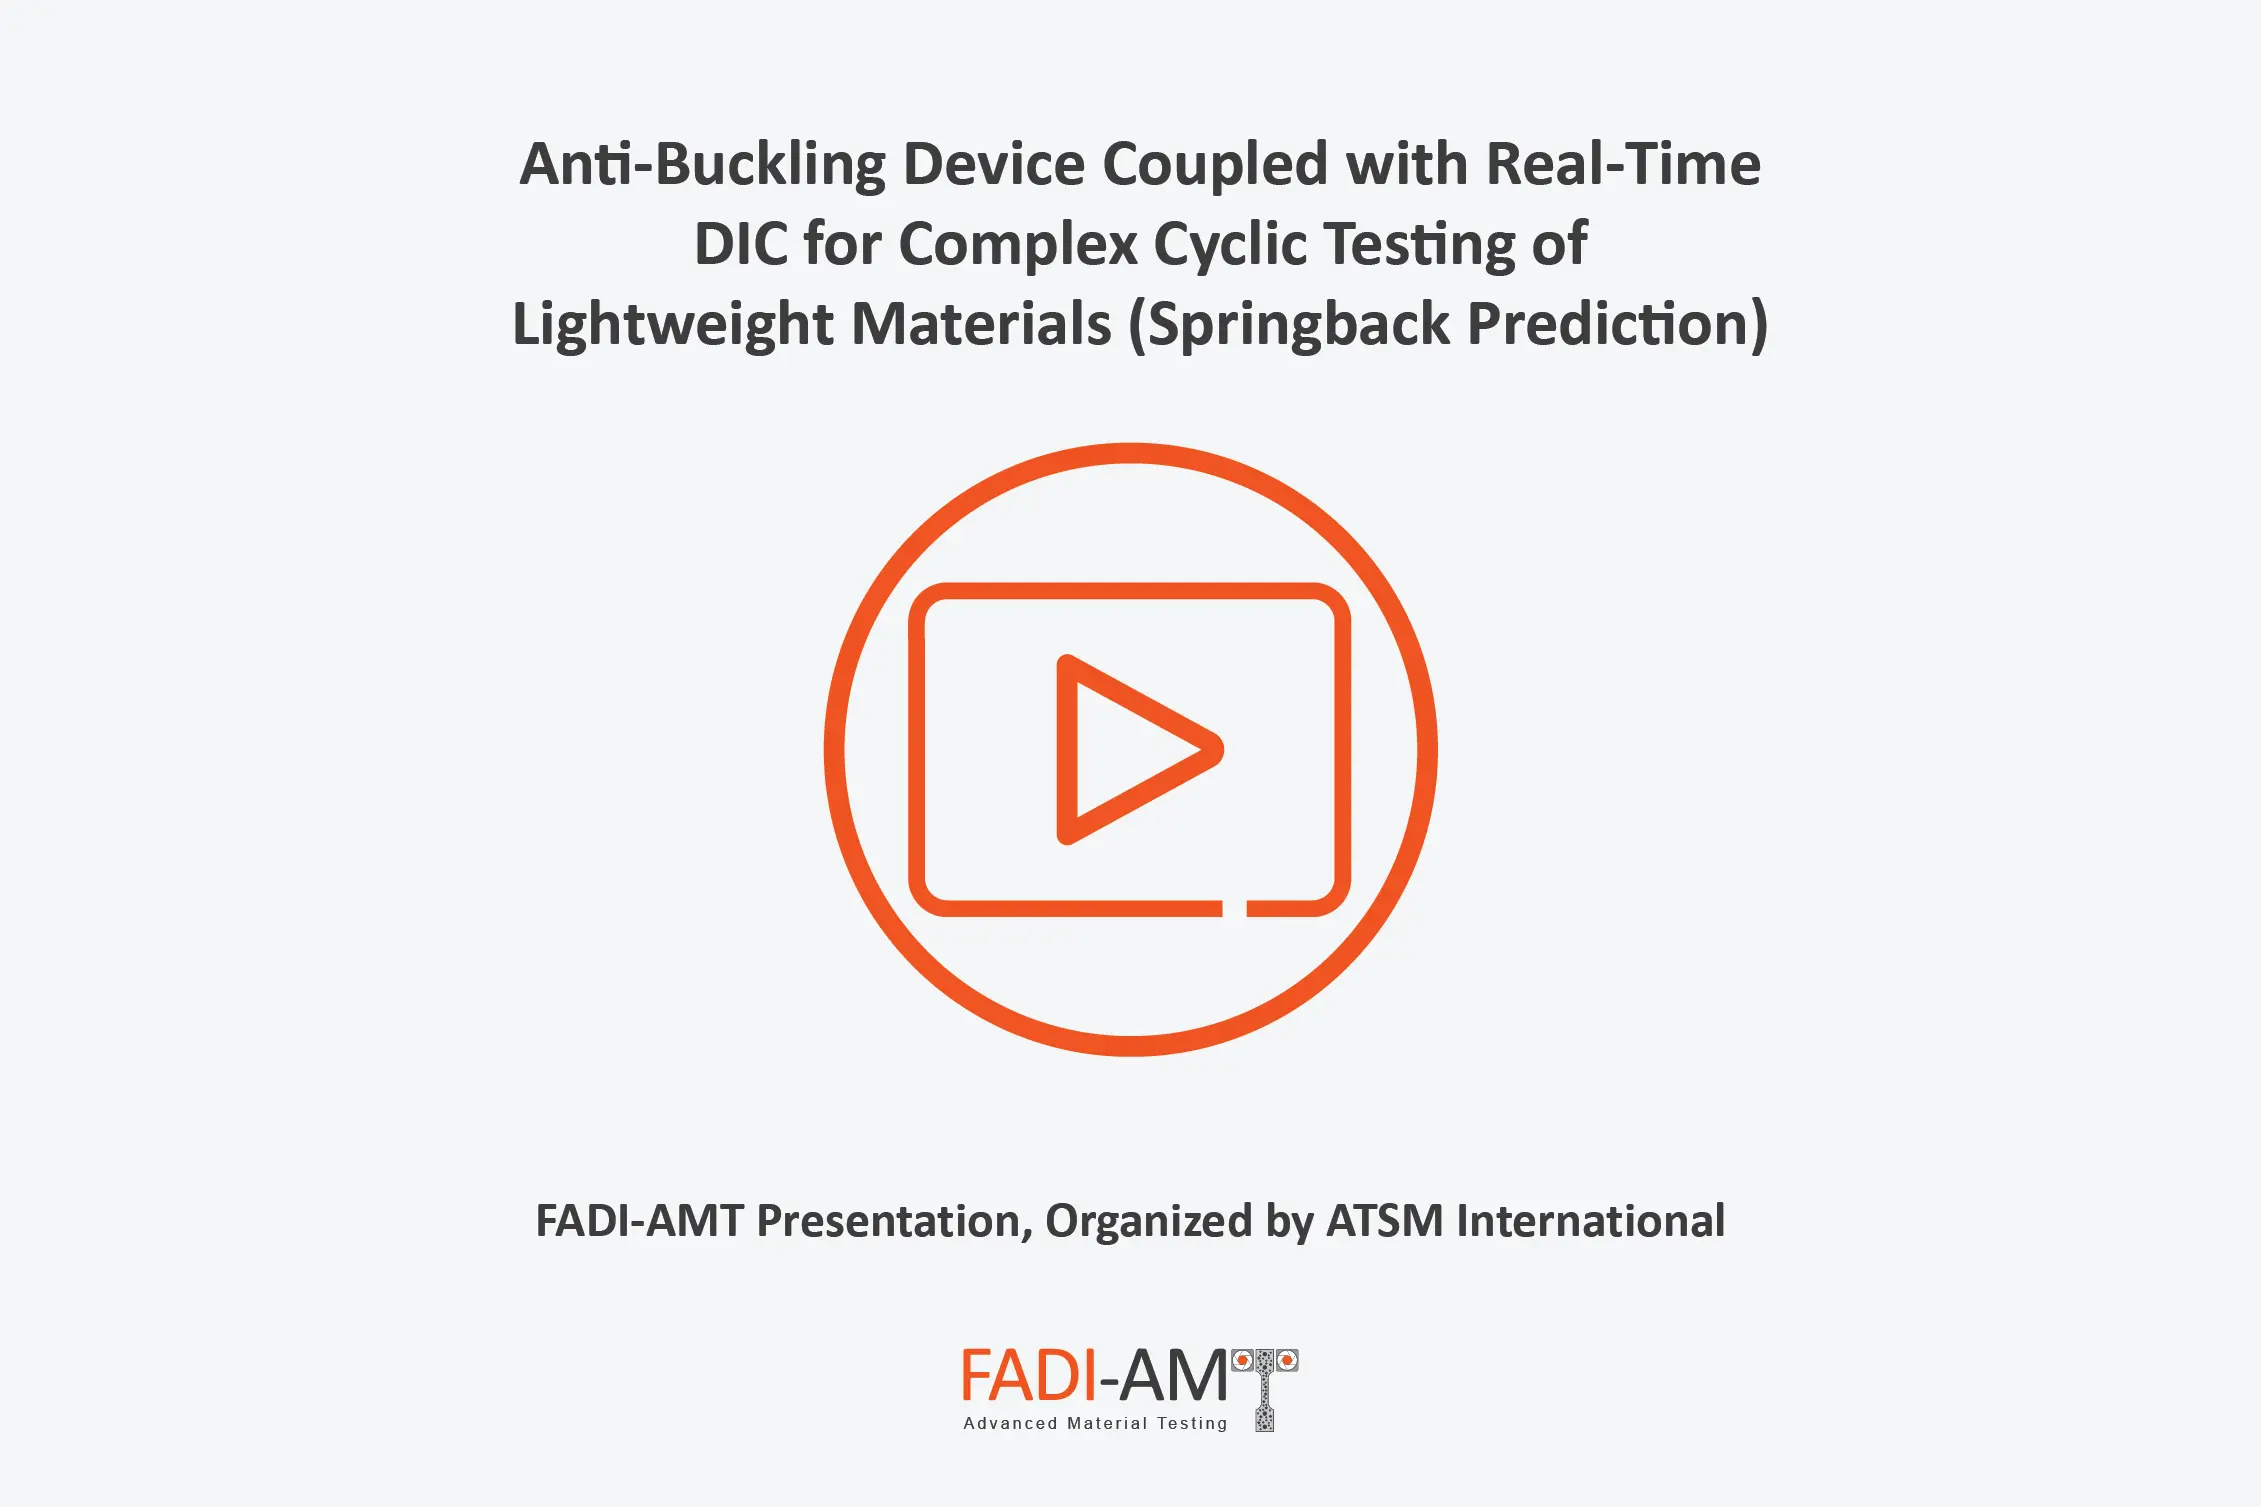 Advanced Anti-Buckling Device Coupled with Real-Time DIC for Complex Cyclic TC Testing of Lightweight Materials_FADI-AMT